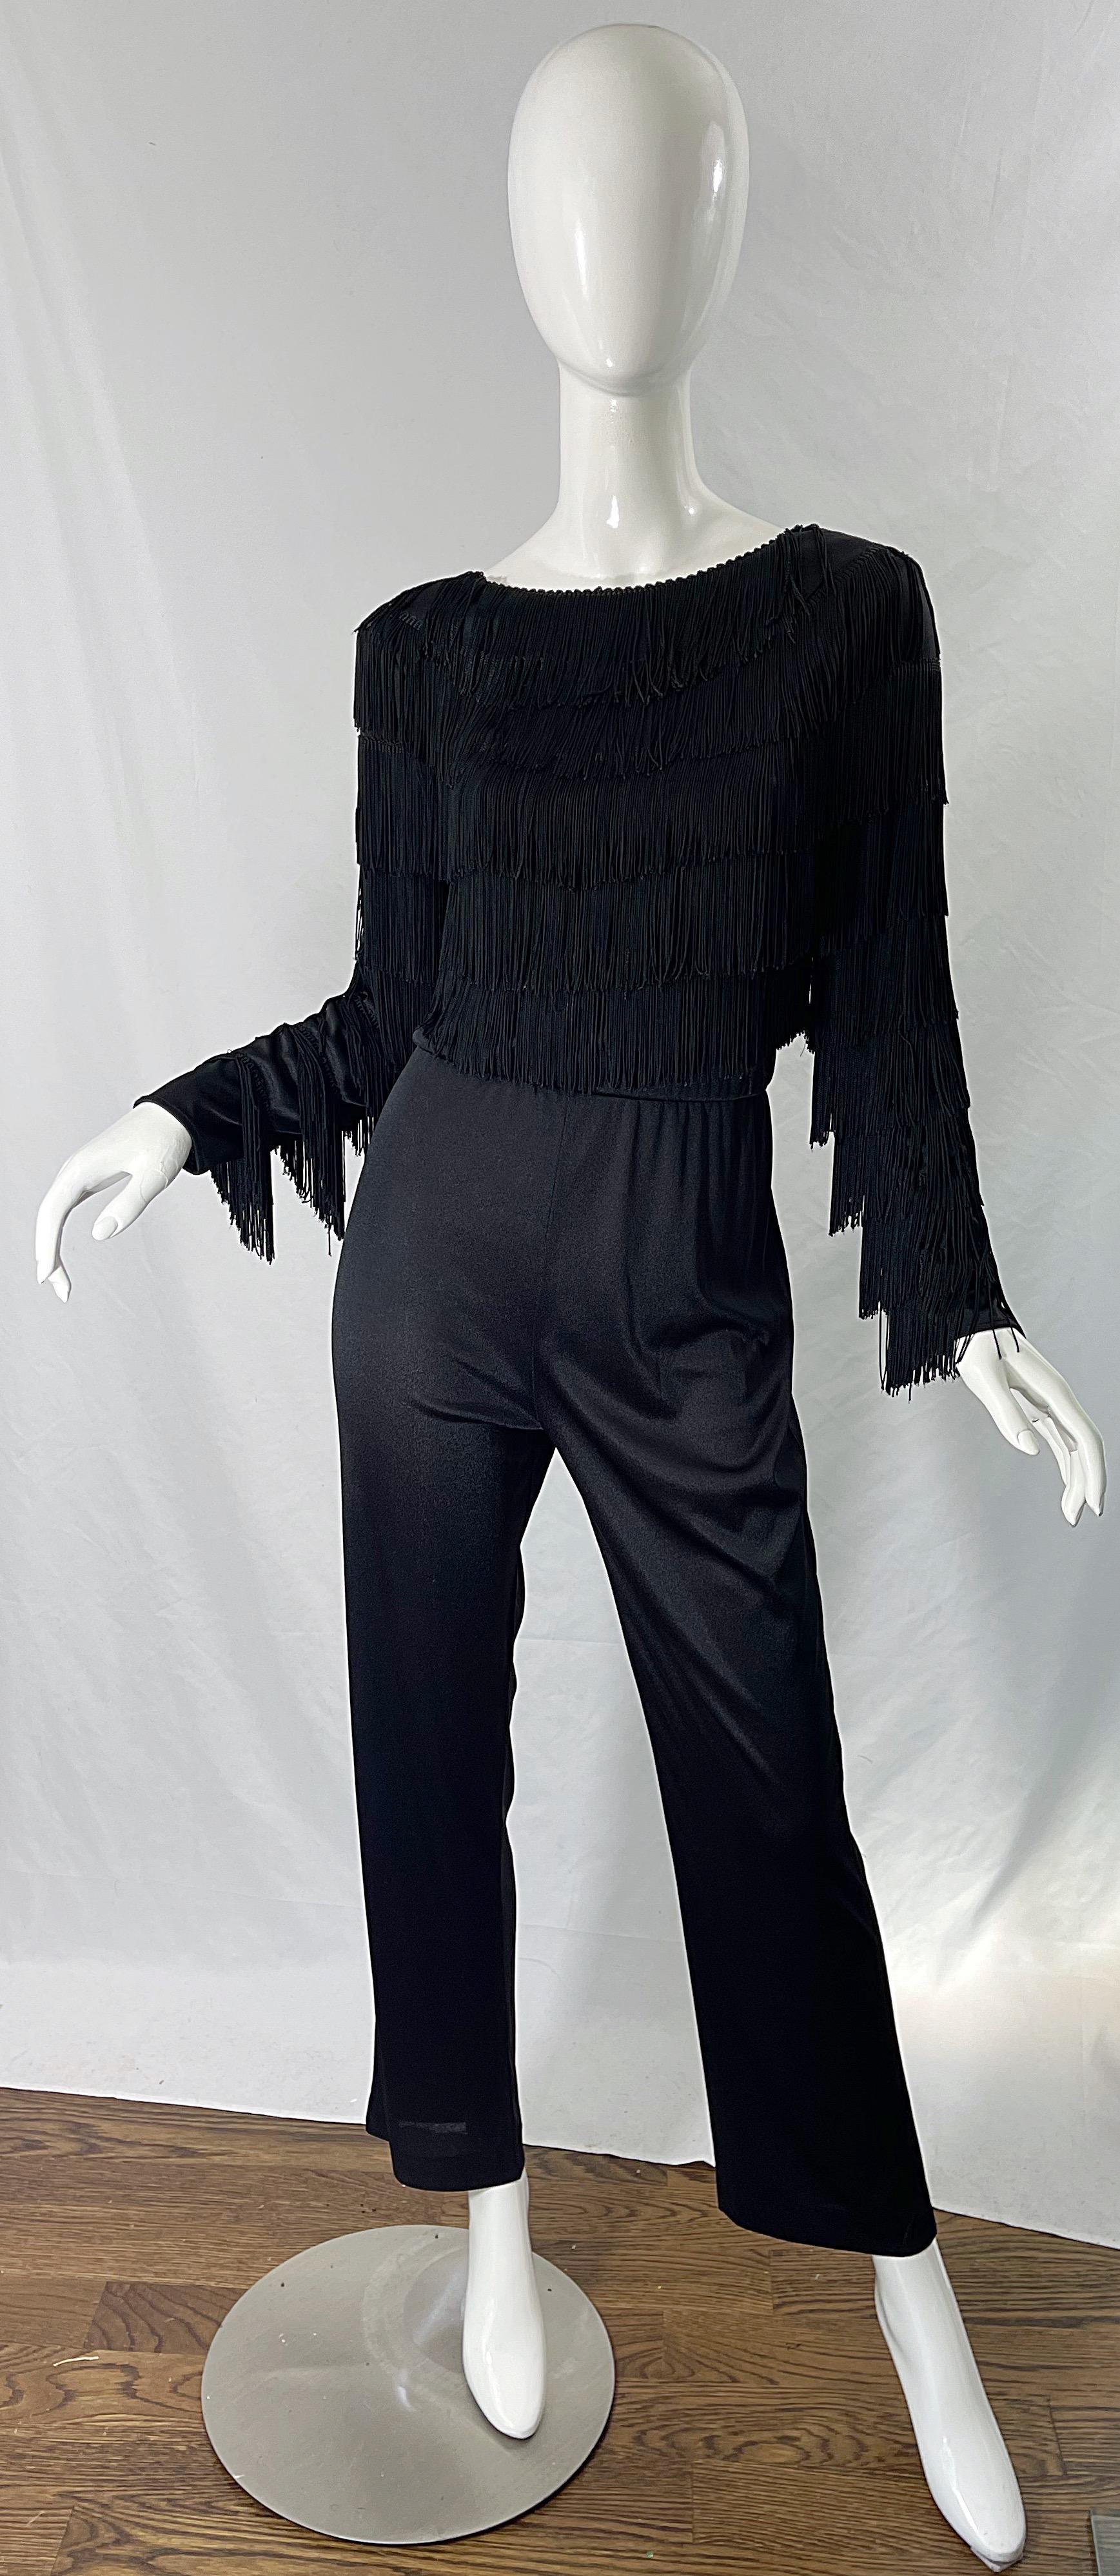 Amazing late 1970s JOY STEVENS jet black fringe jersey jumpsuit ! Features a tailored bodice with layers of fringe on the front, back and sleeves. Hidden zipper up the back with hook-and-eye closure. The perfect alternative to a dress! Great anytime